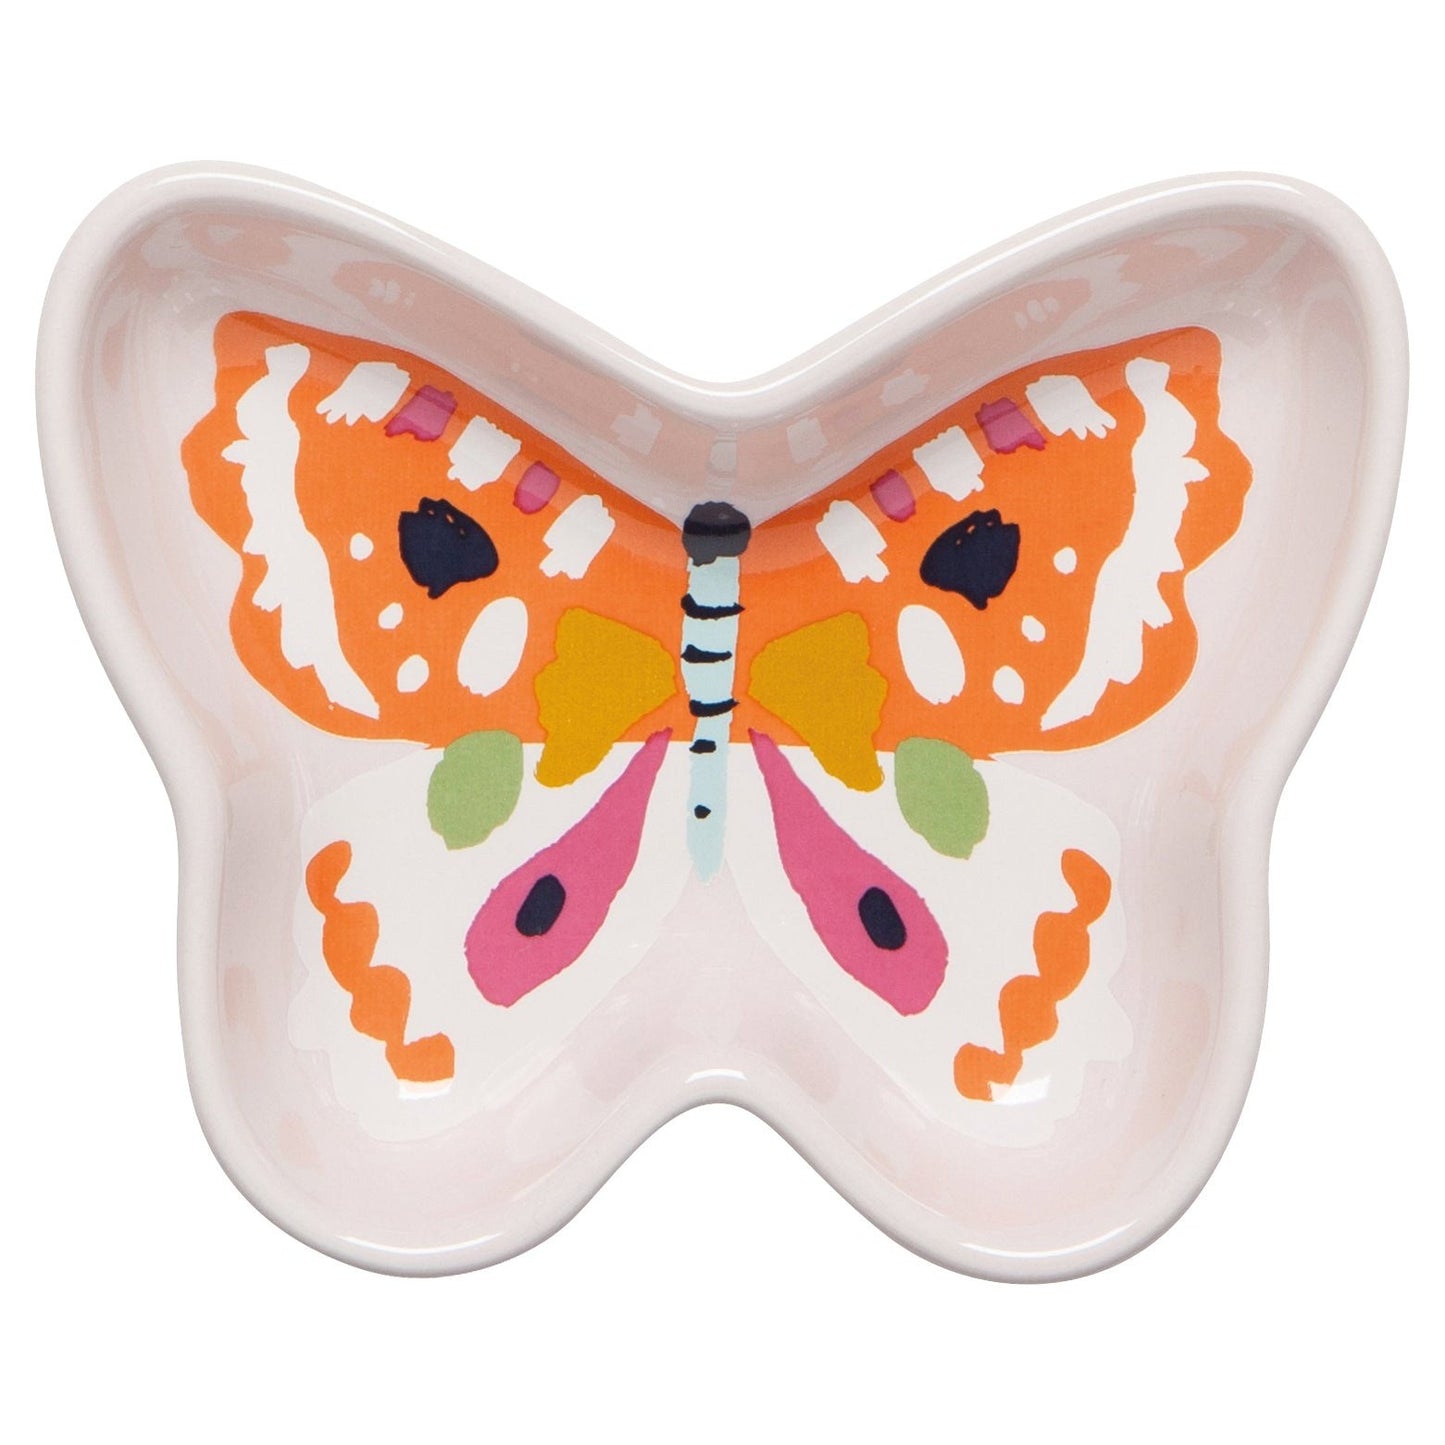 Flutter By Shaped Pinch Bowl each